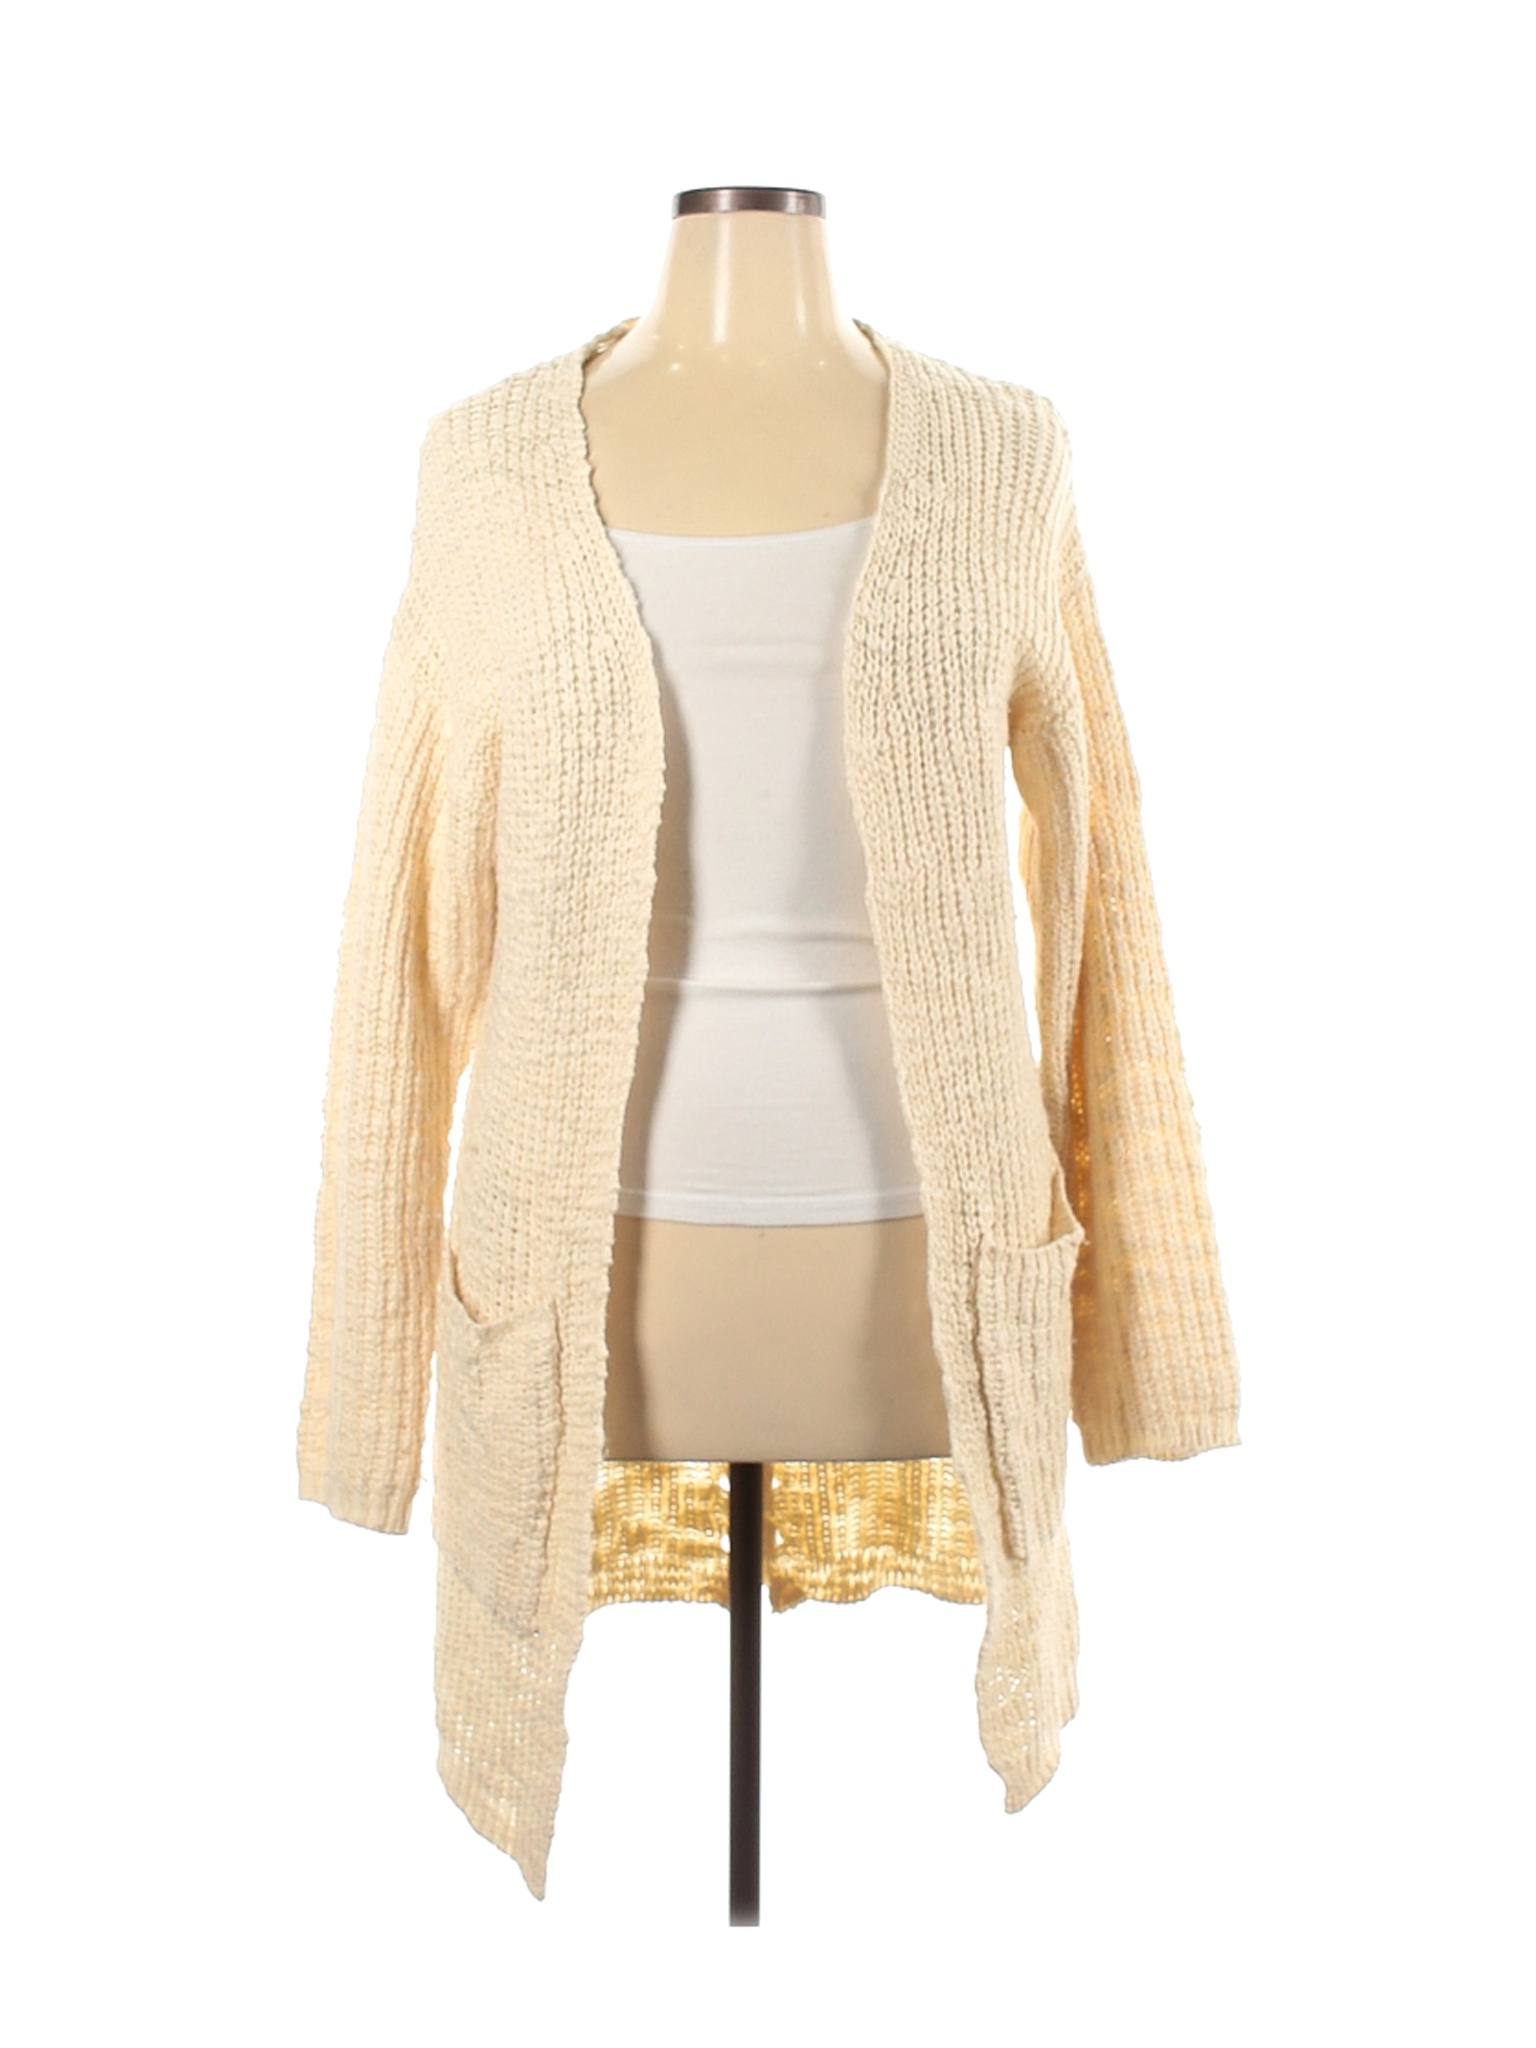 Poof! 100% Acrylic Solid Tan Ivory Cardigan Size XL - 63% off | thredUP